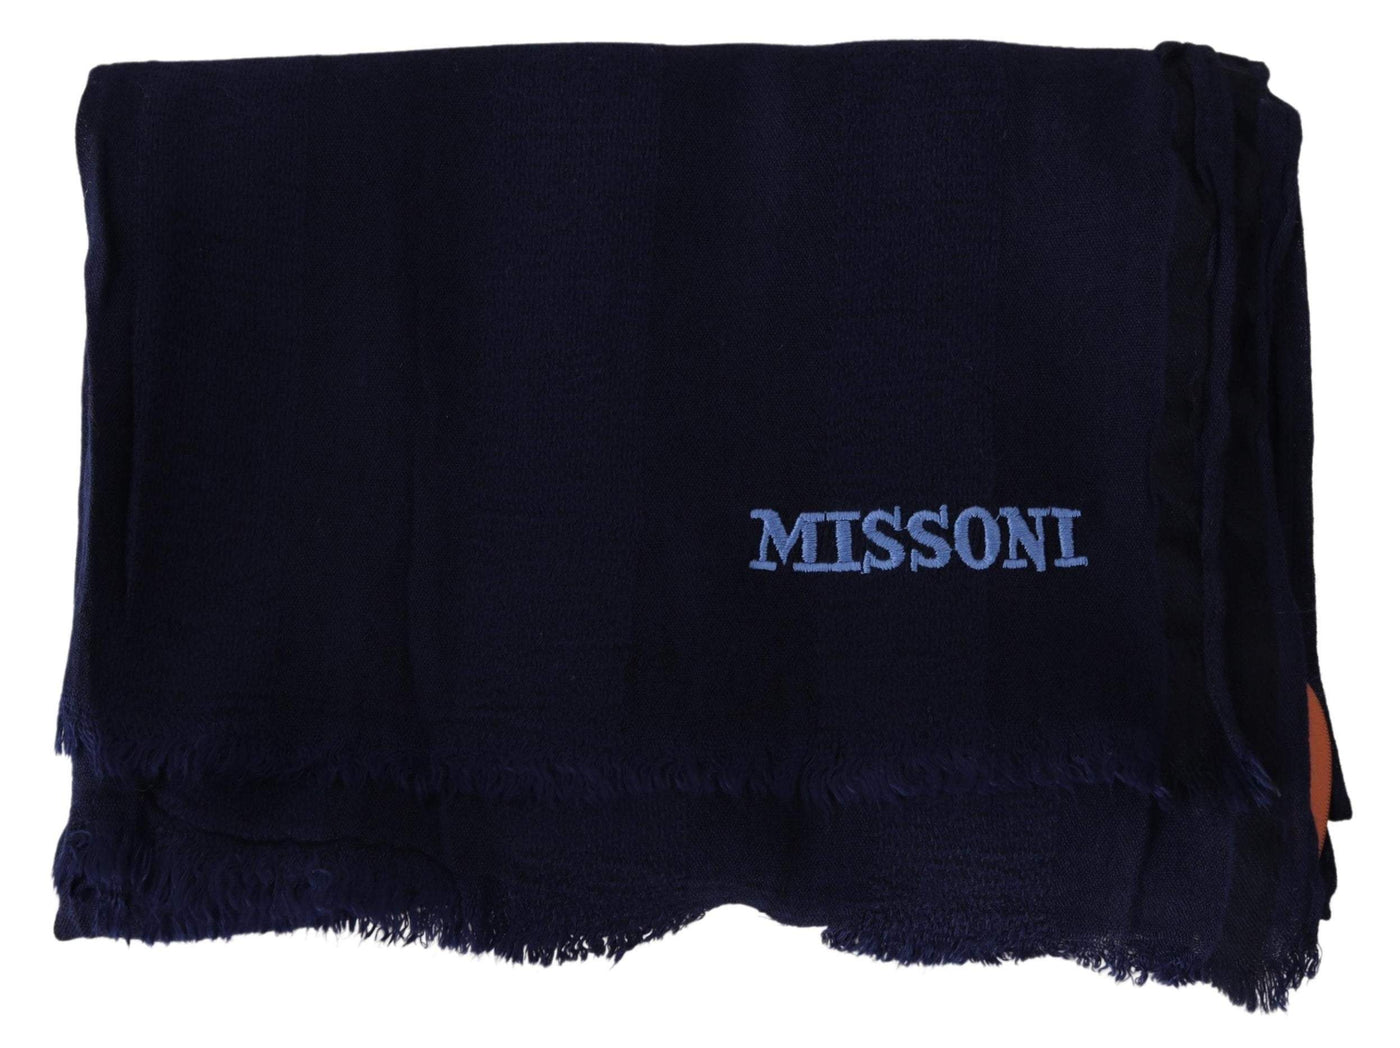 Missoni Blue Wool Knit Unisex Neck Wrap Scarf #men, Accessories - New Arrivals, Blue, feed-agegroup-adult, feed-color-Blue, feed-gender-male, Missoni, Scarves - Men - Accessories at SEYMAYKA